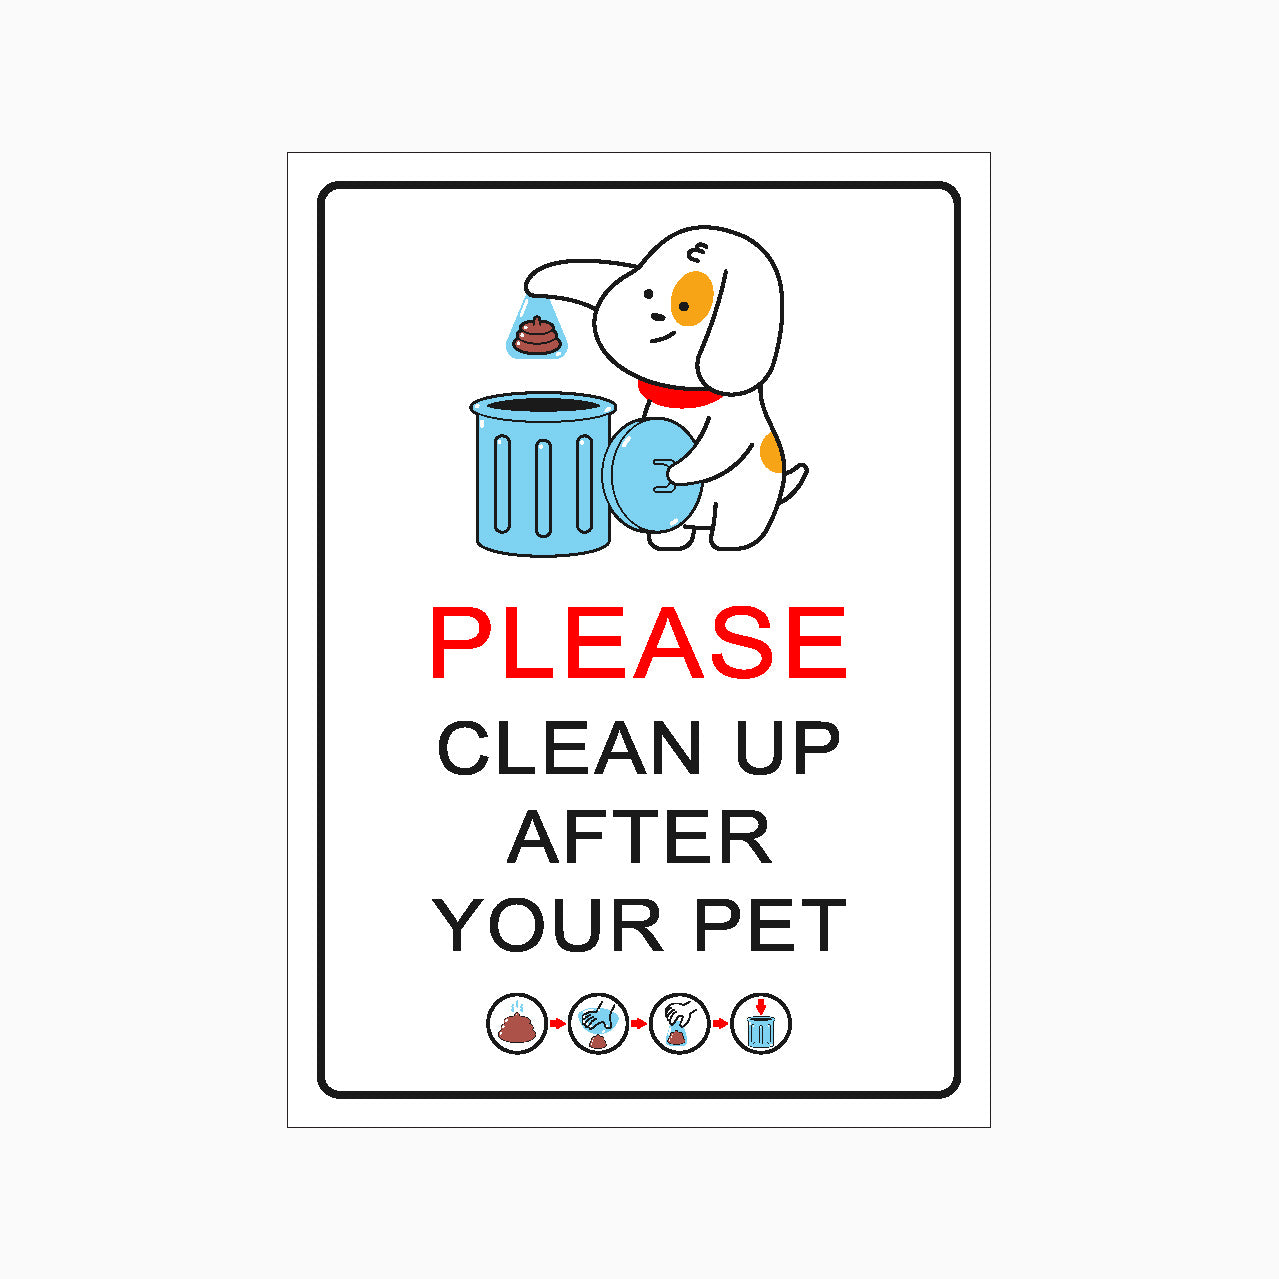 PLEASE CLEAN UP AFTER YOUR PET SIGN